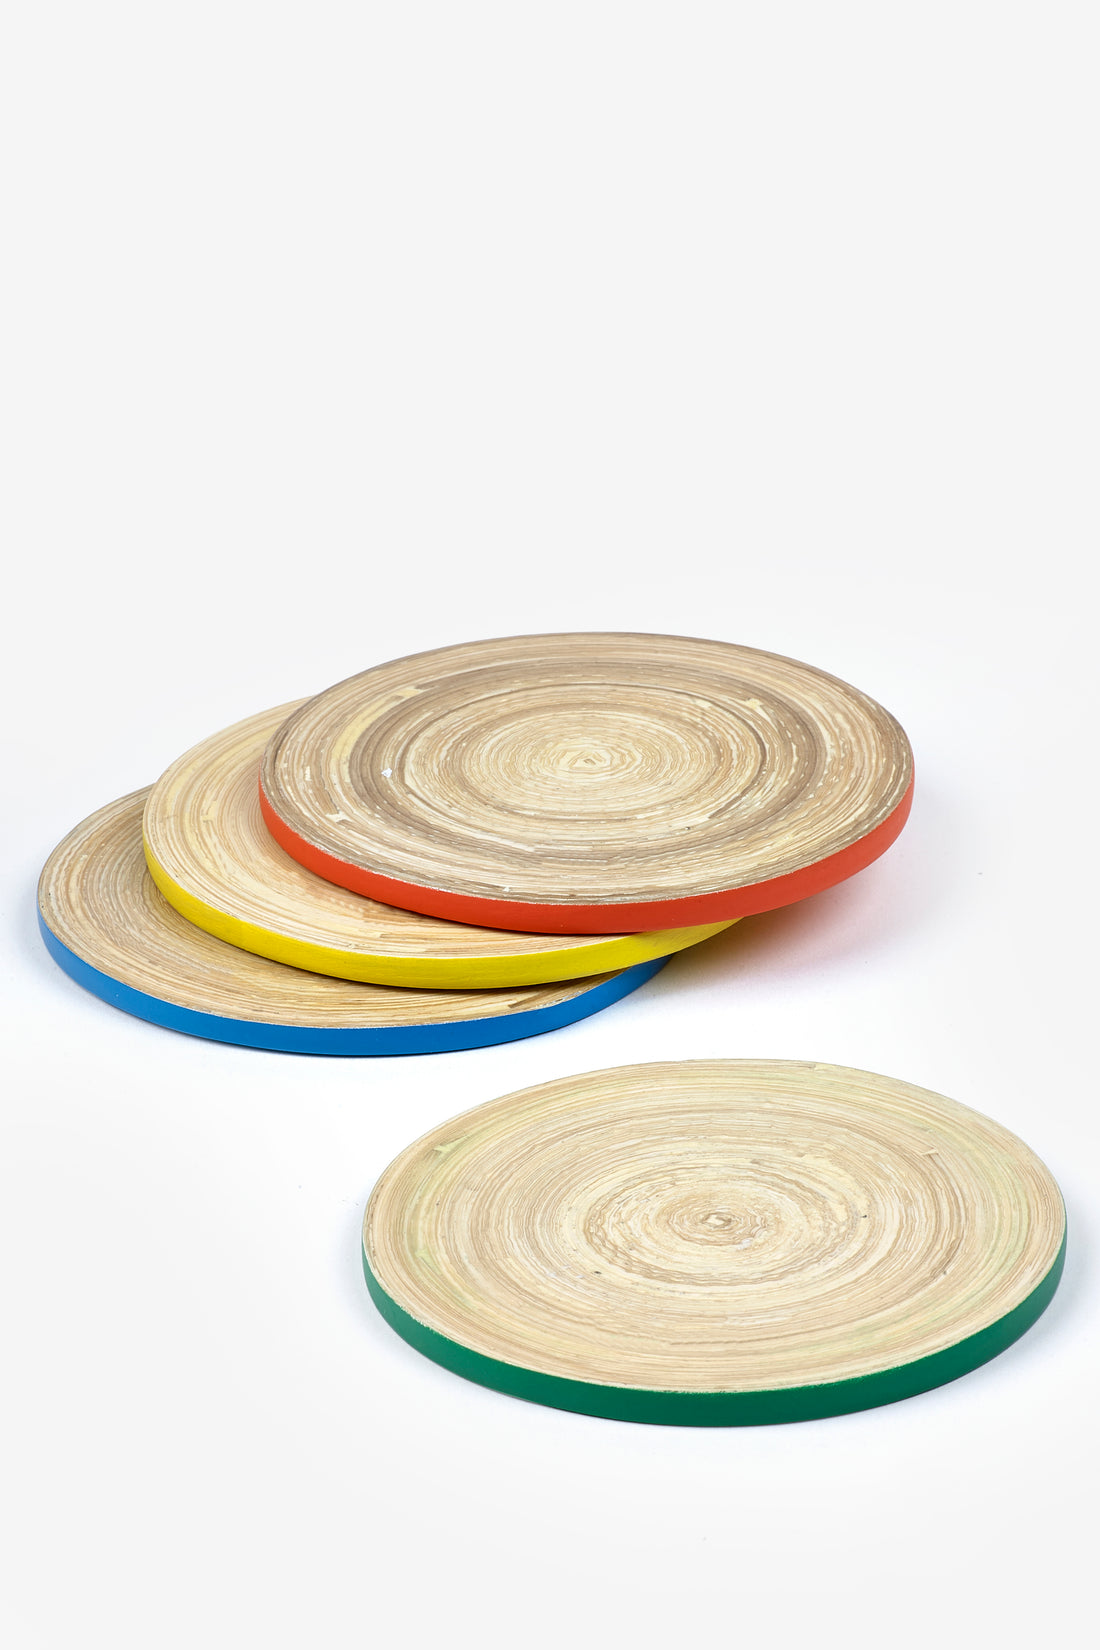 Sur La Table Bamboo Round Coasters (Set of 4)